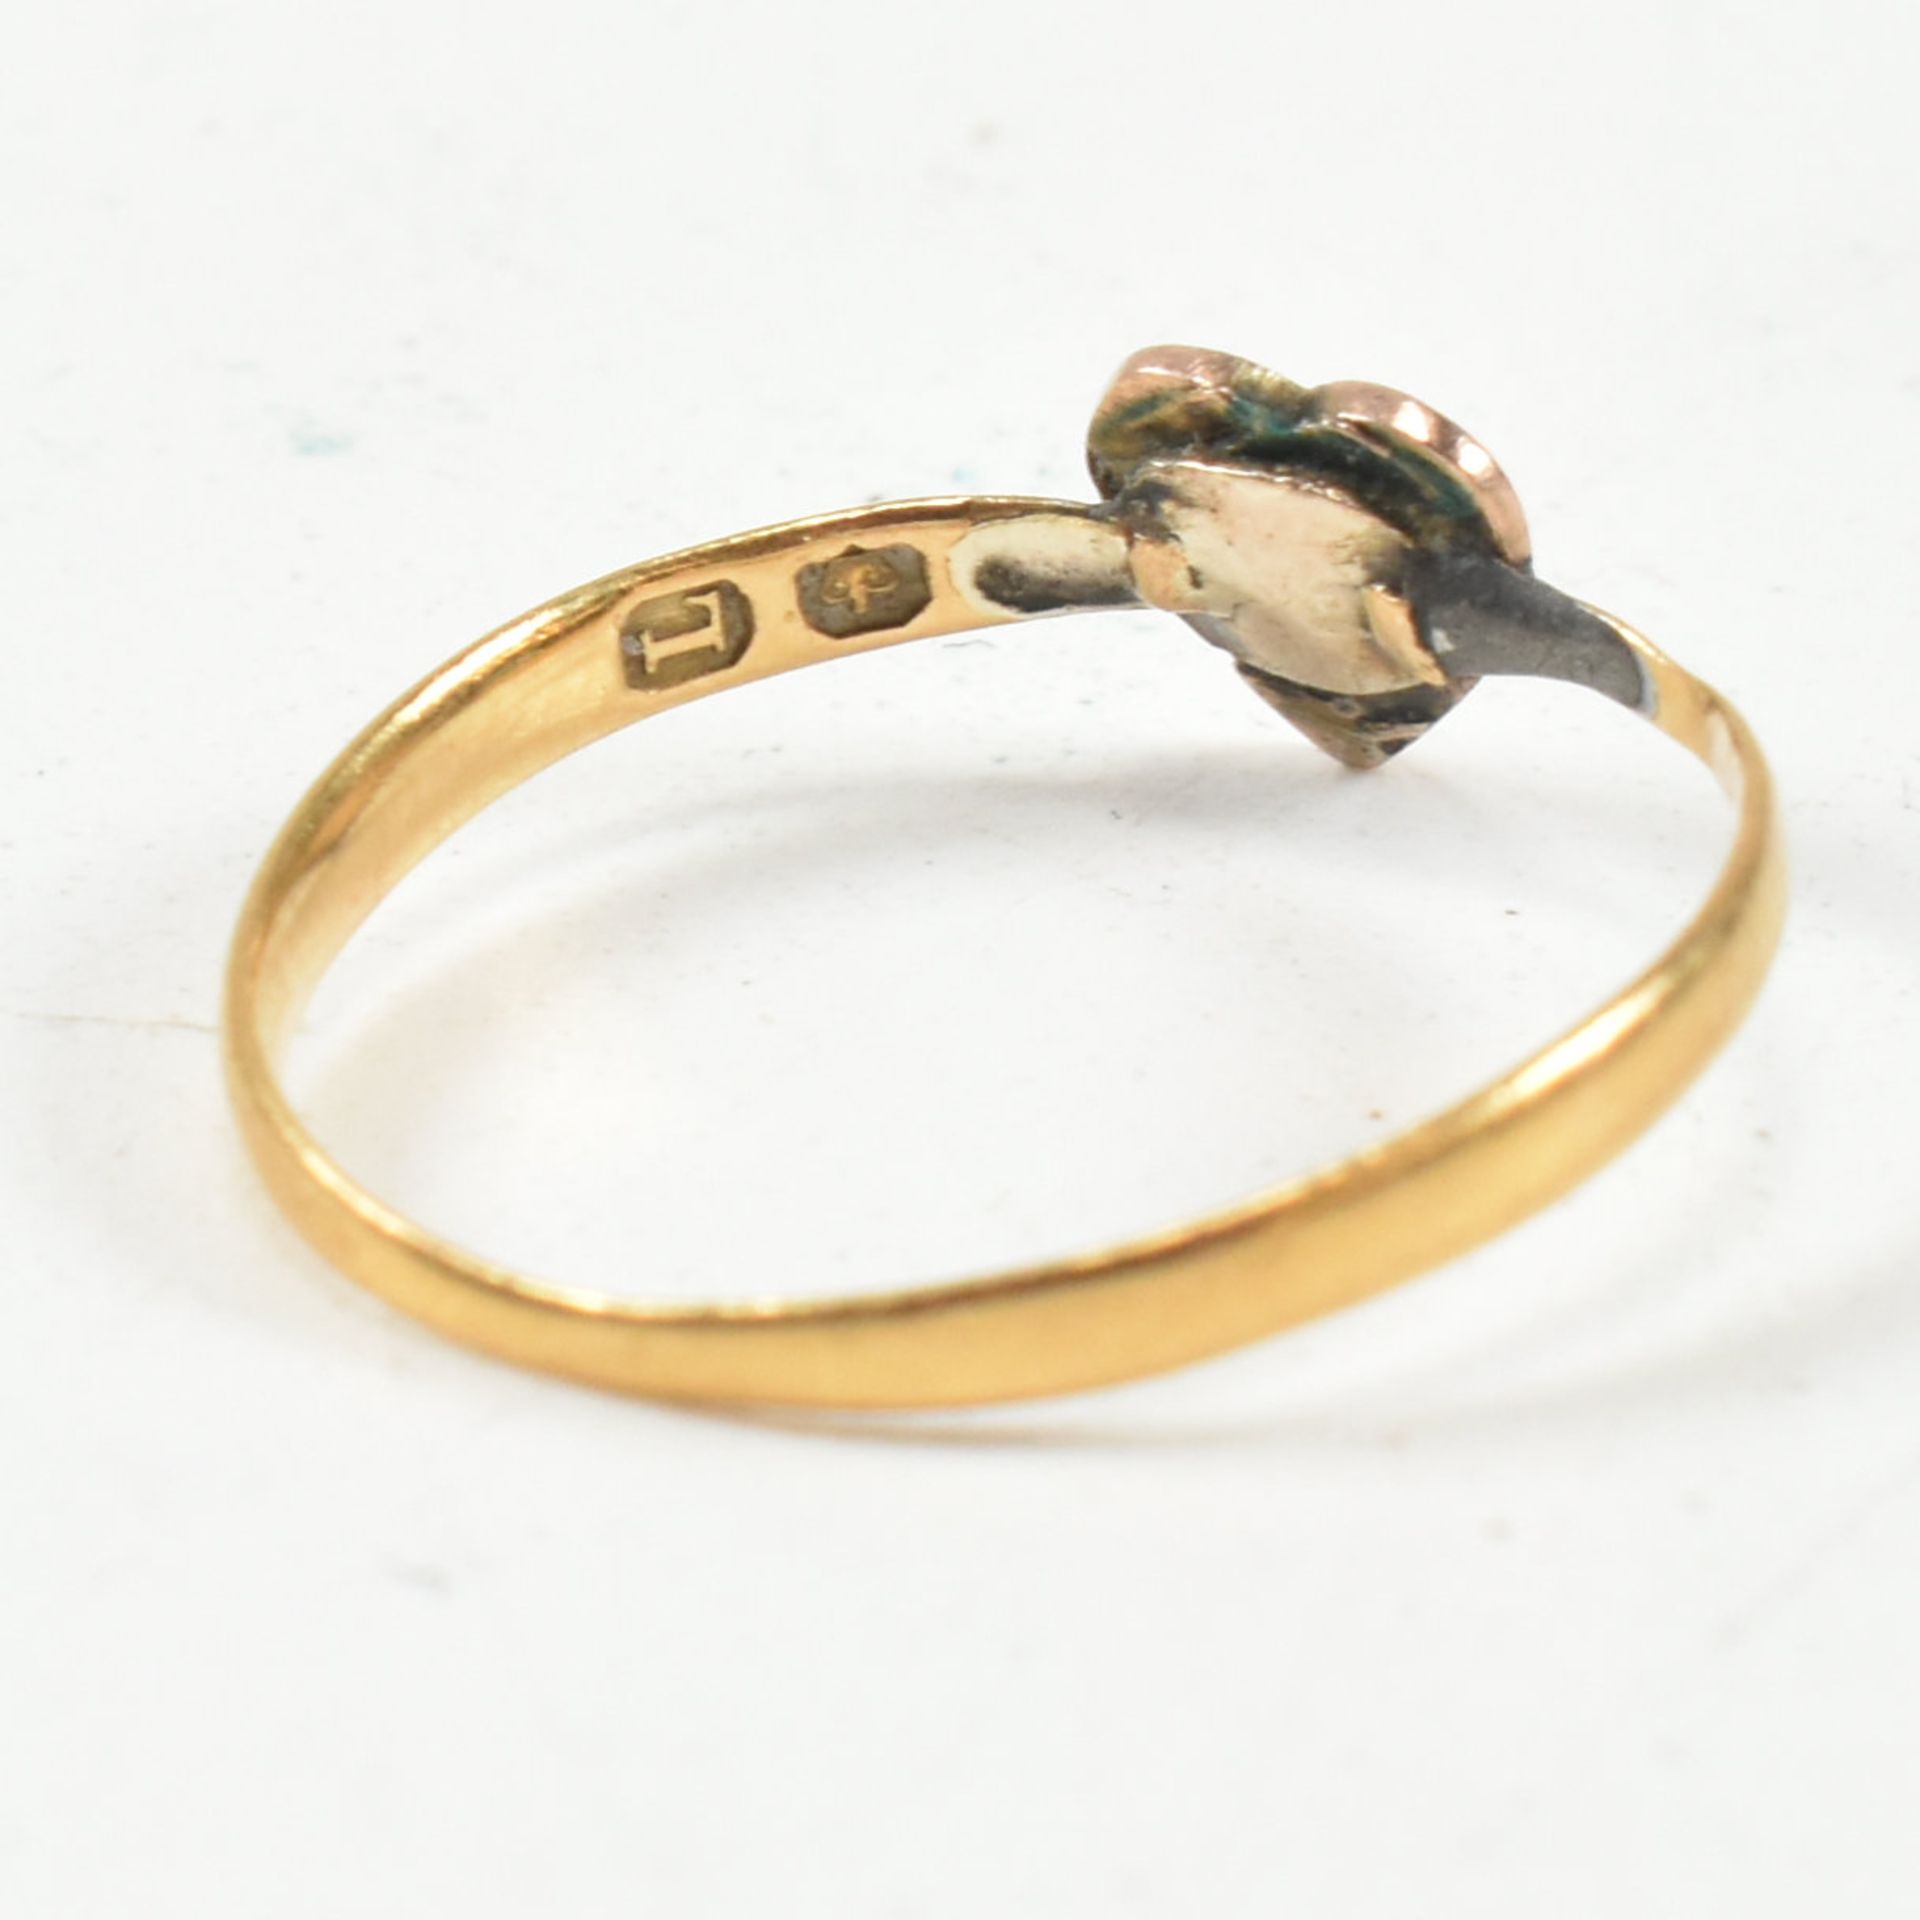 VICTORIAN HALLMARKED 22CT GOLD BAND RING & HALLMARKED 14CT GOLD & SEED PEARL HEART RING - Image 6 of 7